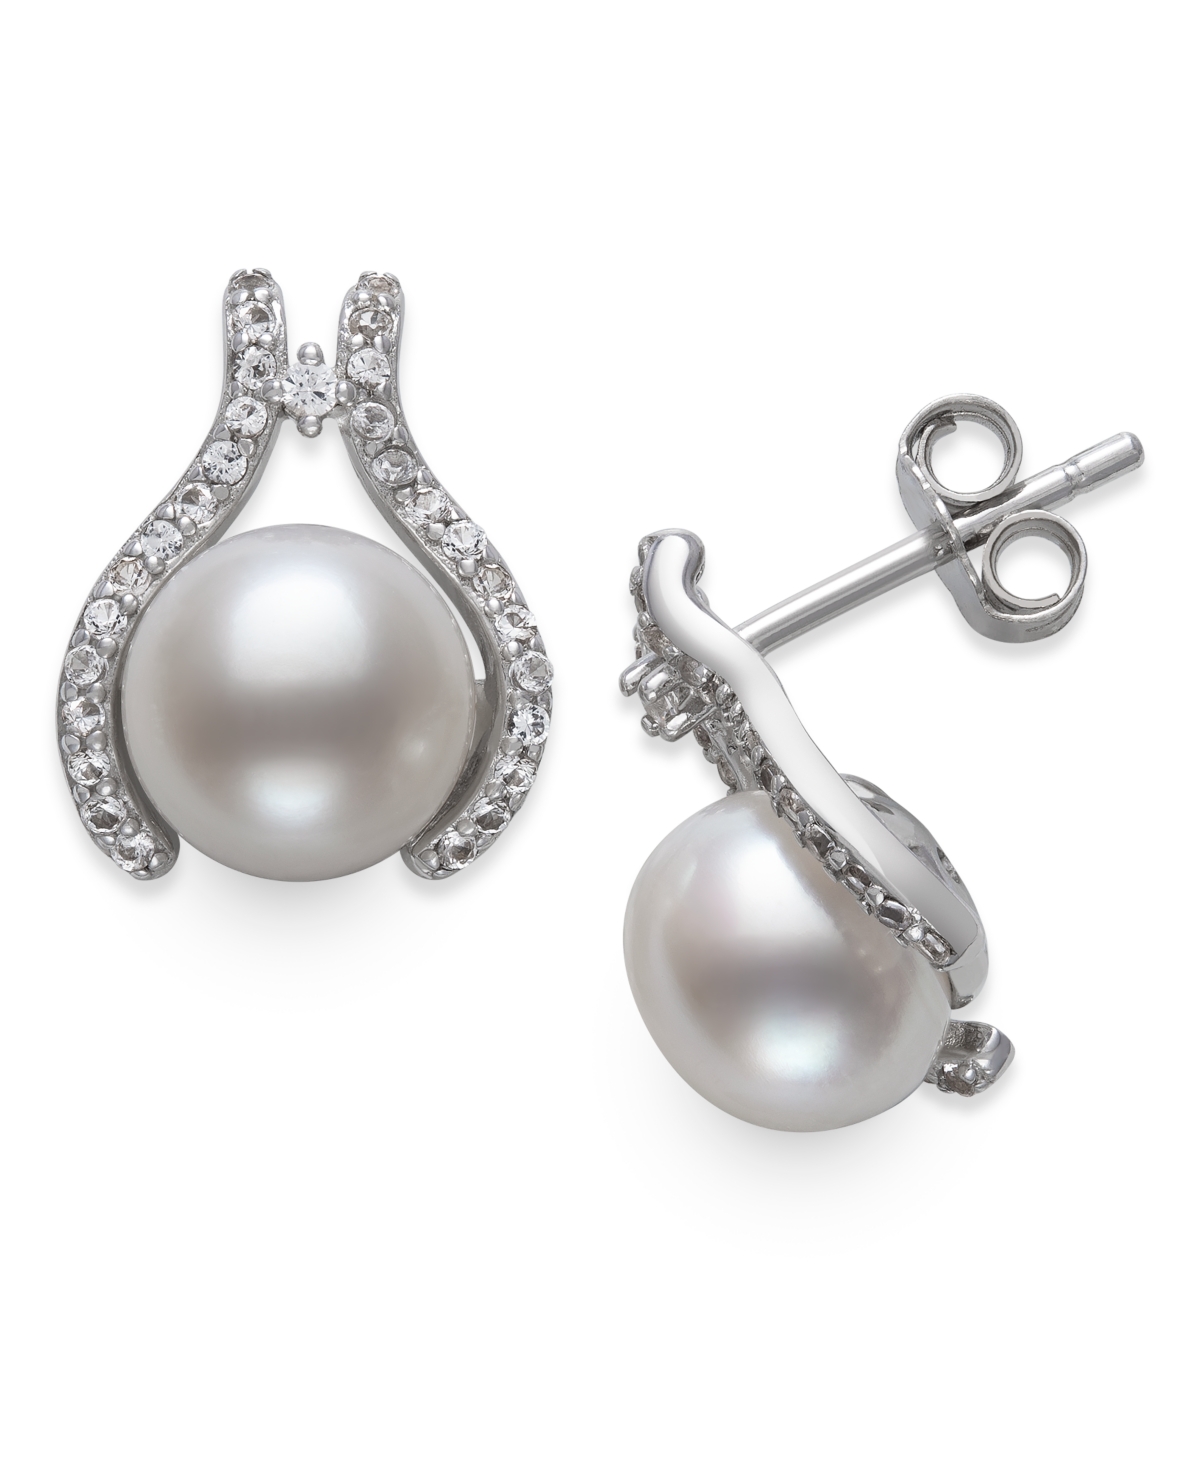 Cultured Freshwater Button Pearl (7mm) & Cubic Zirconia Stud Earrings in Sterling Silver, Created for Macy's - Sterling Silver